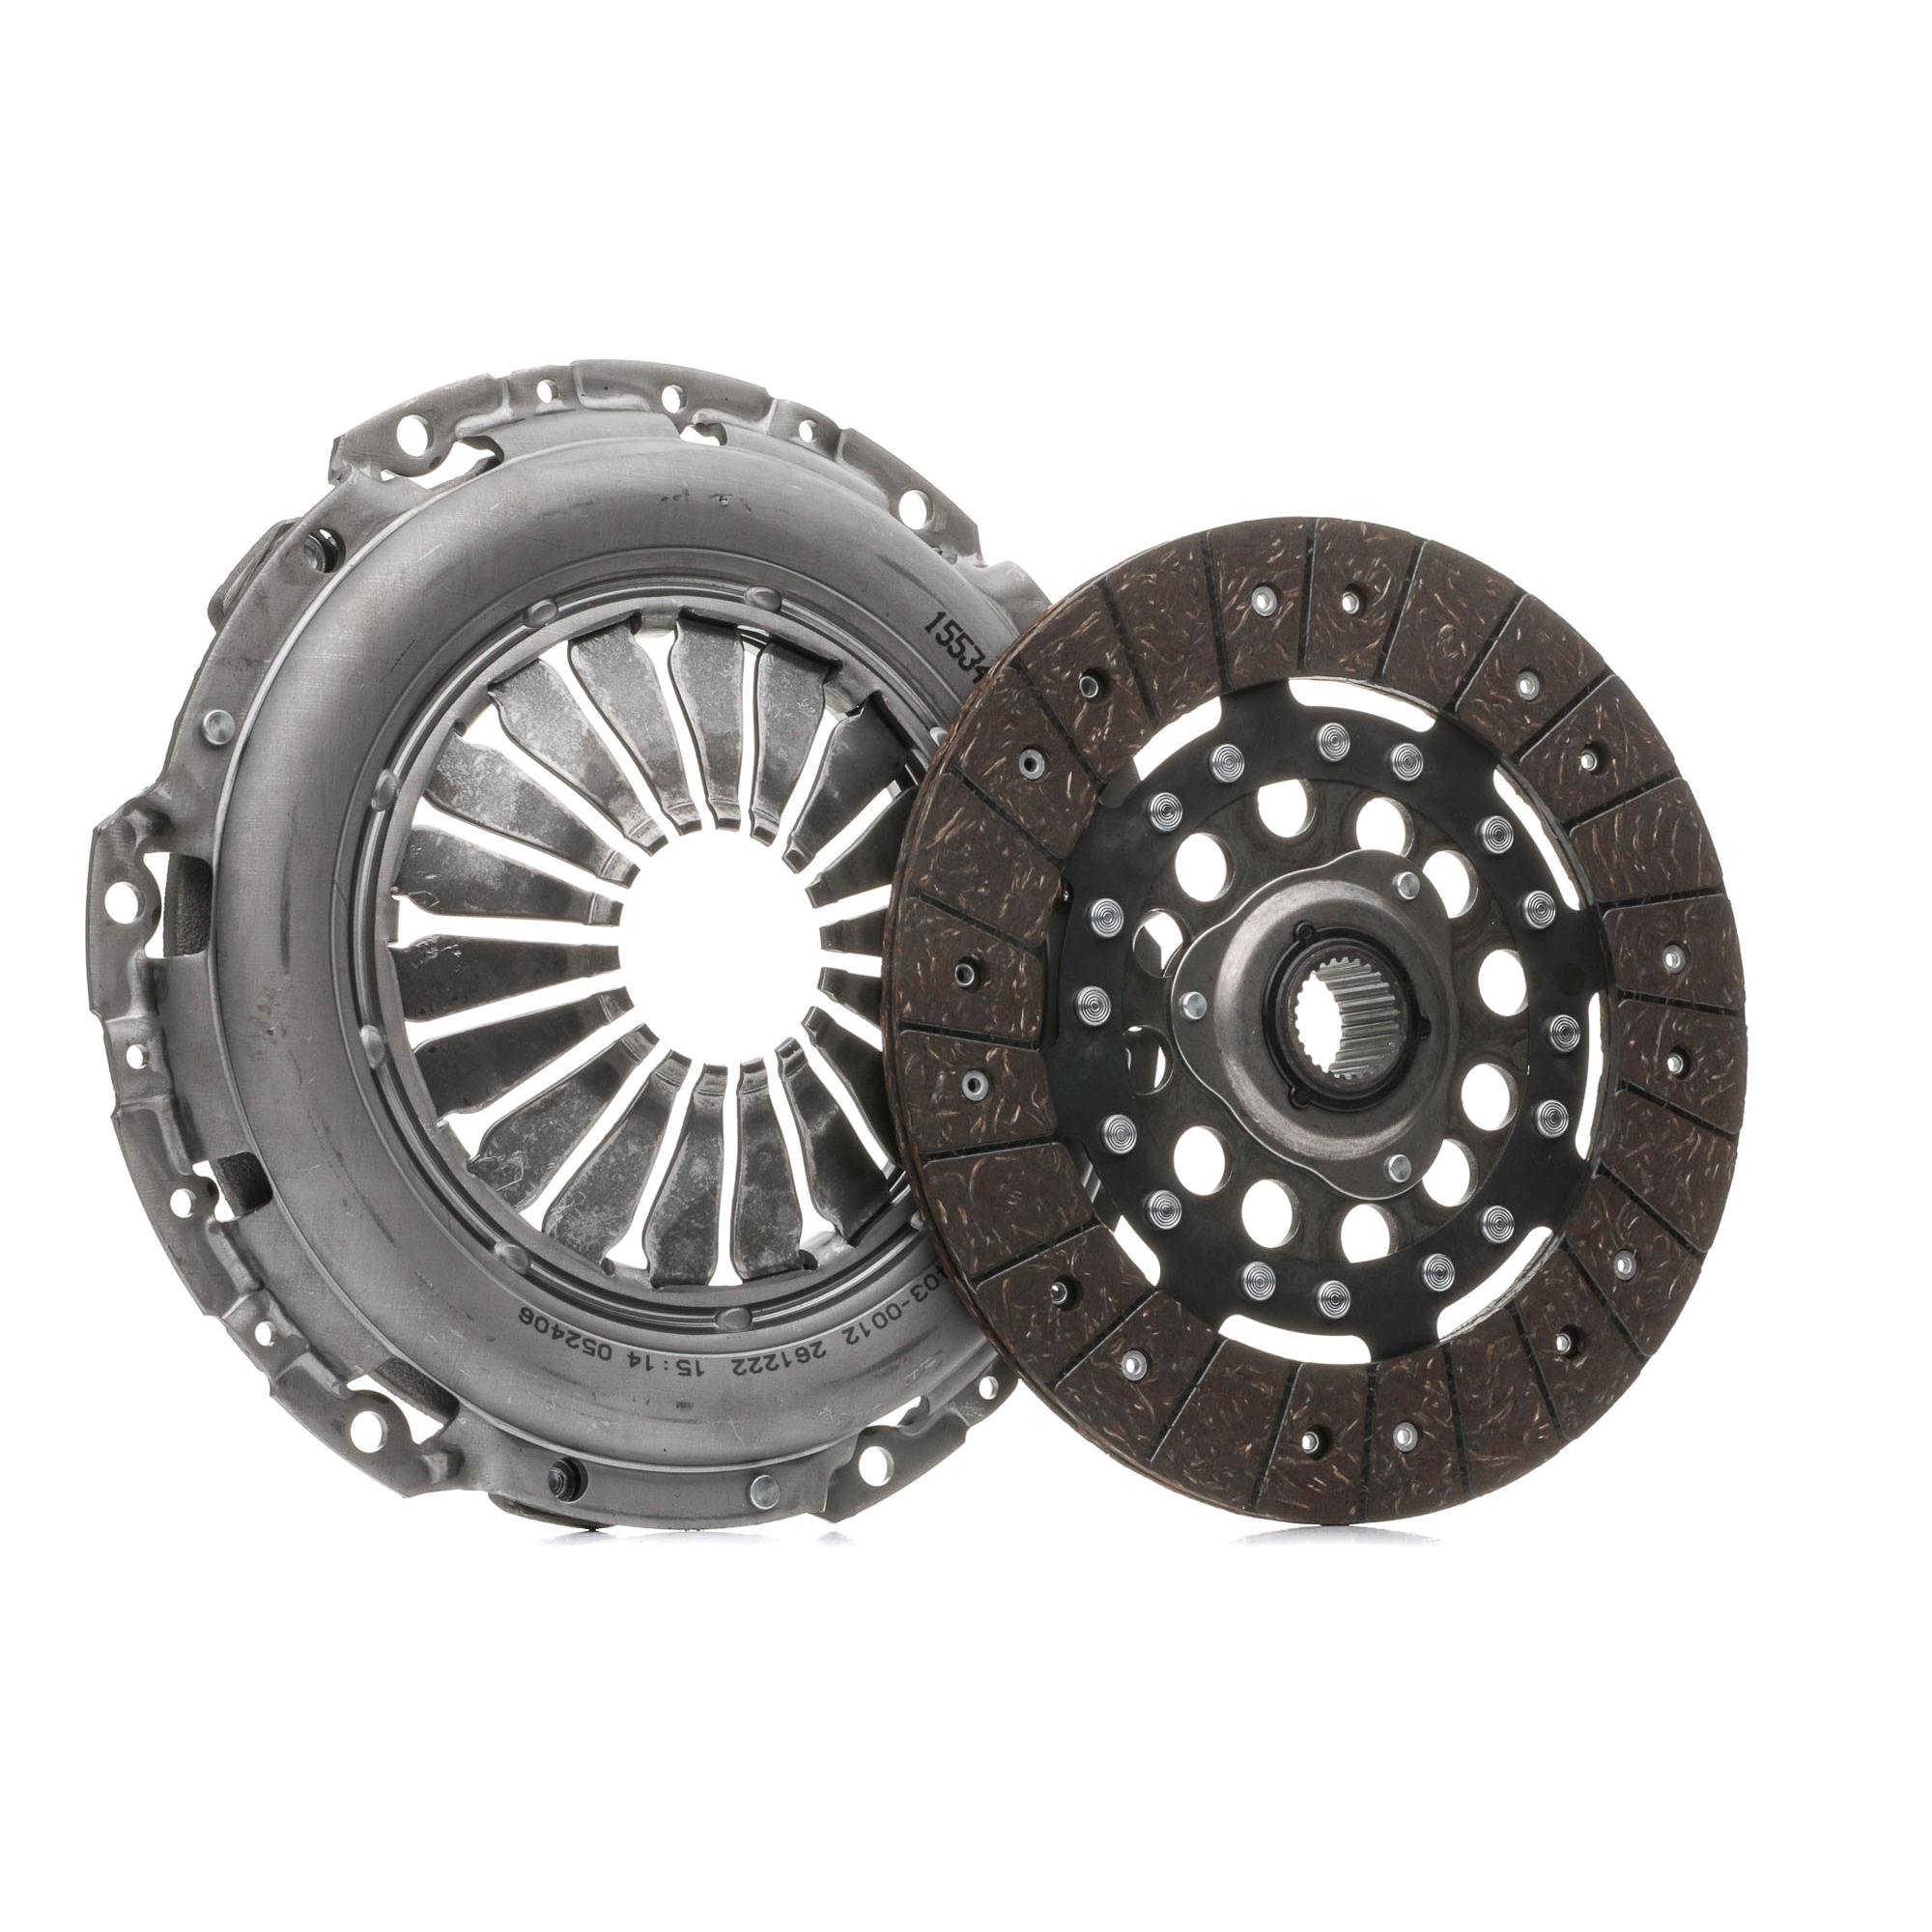 RIDEX 479C0880 Clutch kit for engines with dual-mass flywheel, with clutch disc, without clutch release bearing, Requires special tools for mounting, Check and replace dual-mass flywheel if necessary., with automatic adjustment, 240mm